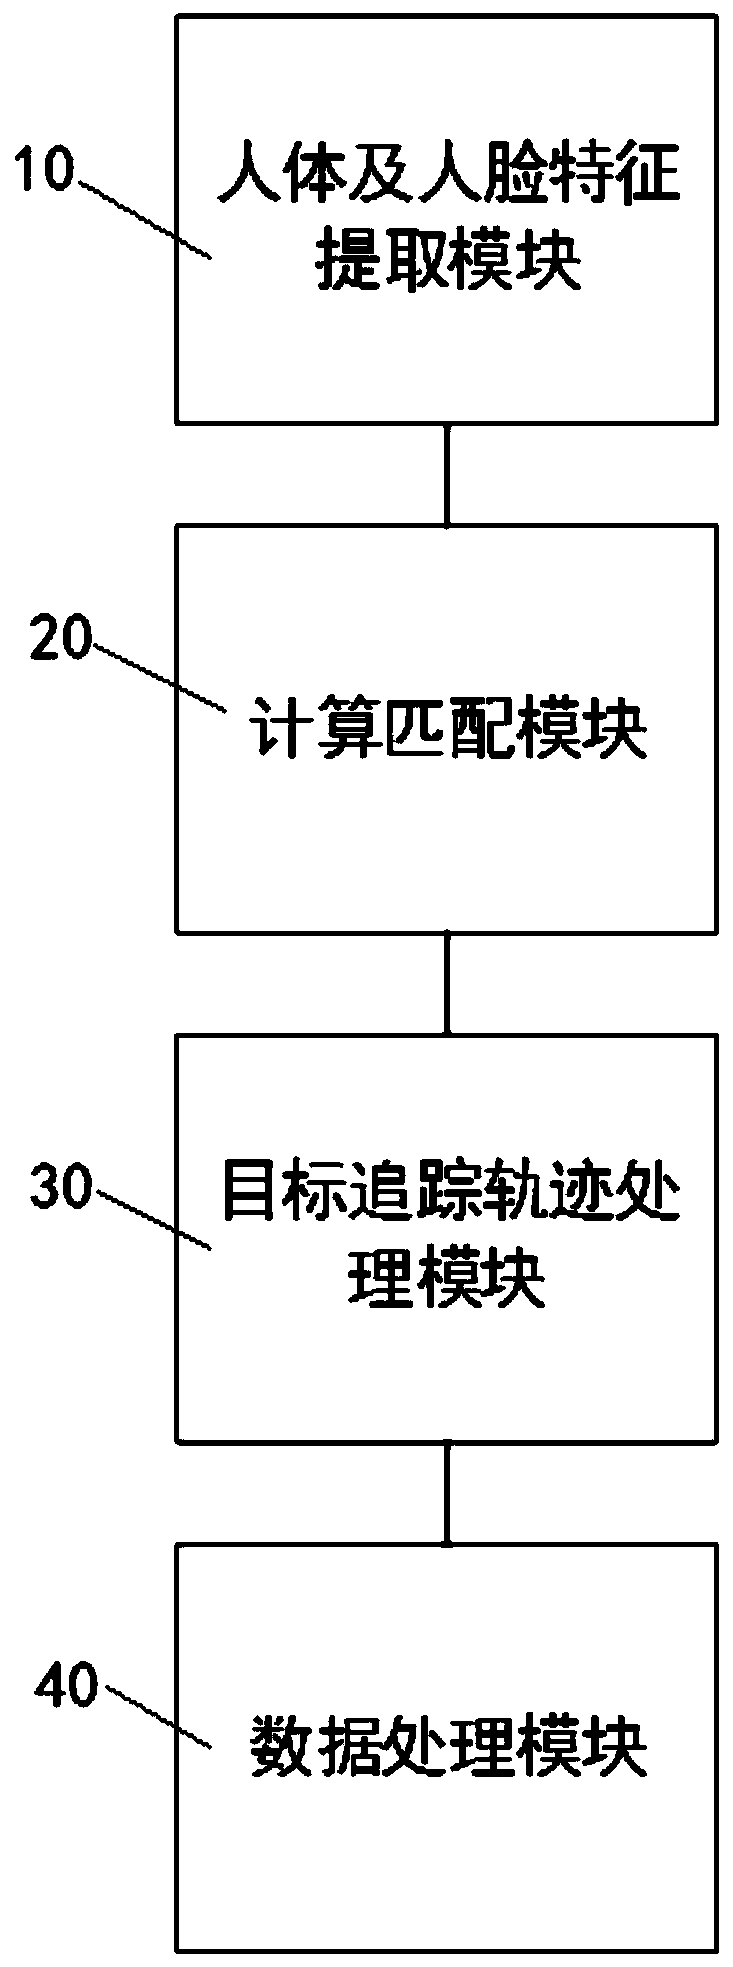 Multi-camera linkage multi-target tracking method and system for smart community